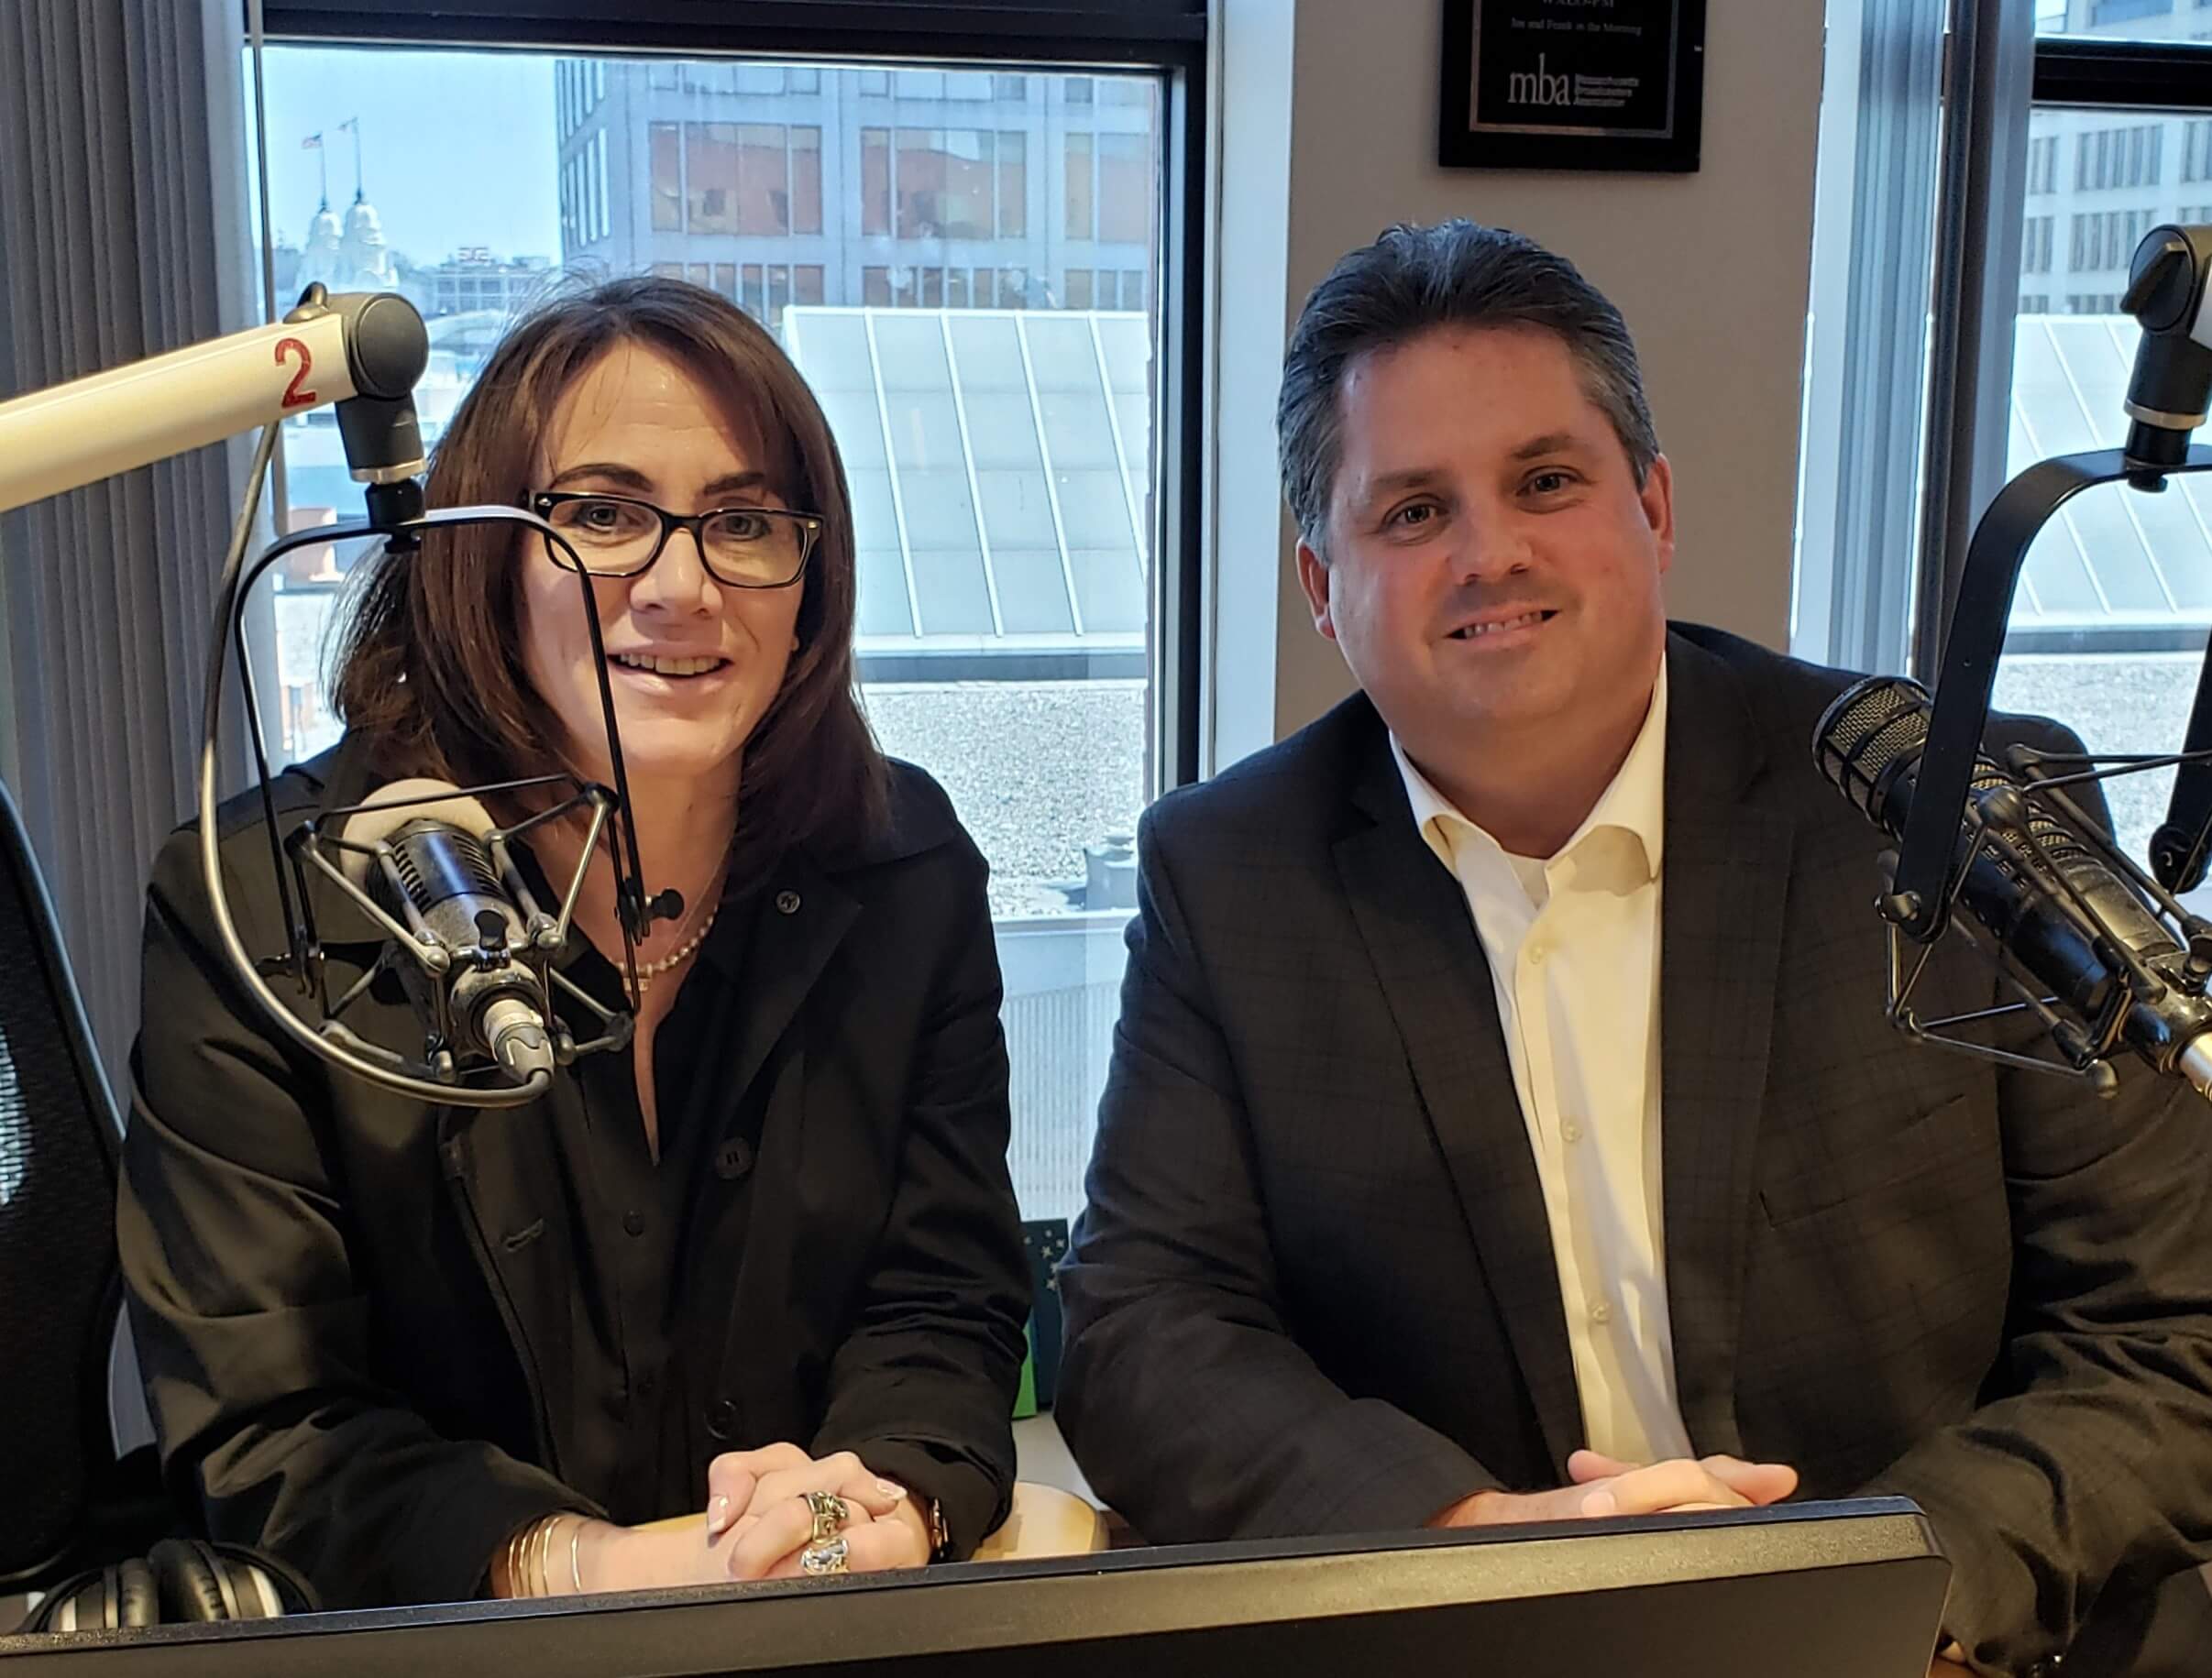 Two people sit in a recording studio. Vicki Green, host of Community Conversations on WXLO 104.5FM is on the left. Carroll Center for the Blind President and CEO, Greg Donnelly, is on the right.